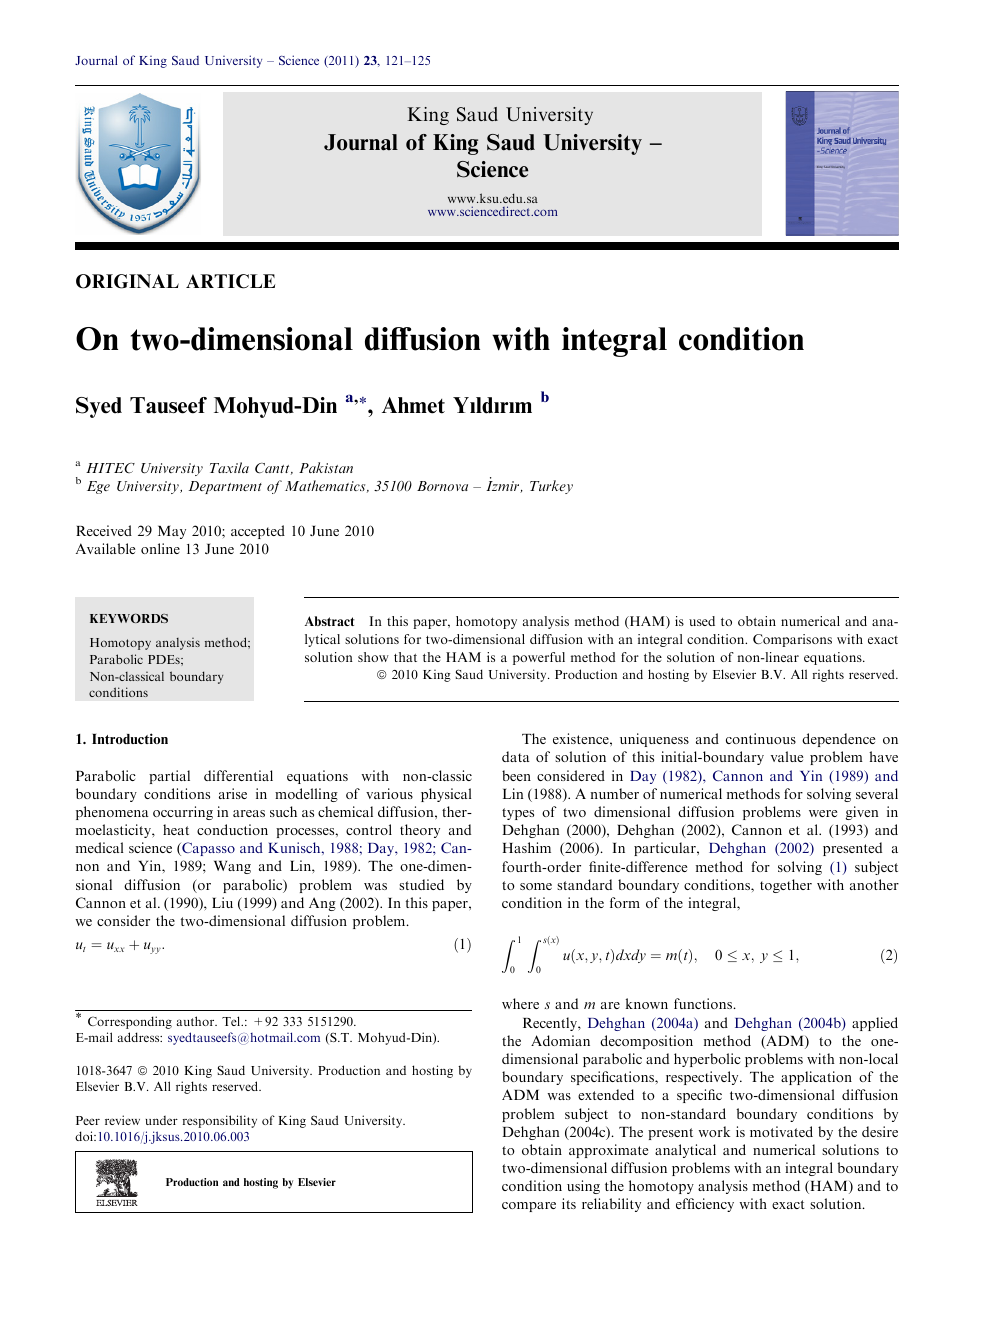 On Two Dimensional Diffusion With Integral Condition Topic Of Research Paper In Mathematics Download Scholarly Article Pdf And Read For Free On Cyberleninka Open Science Hub